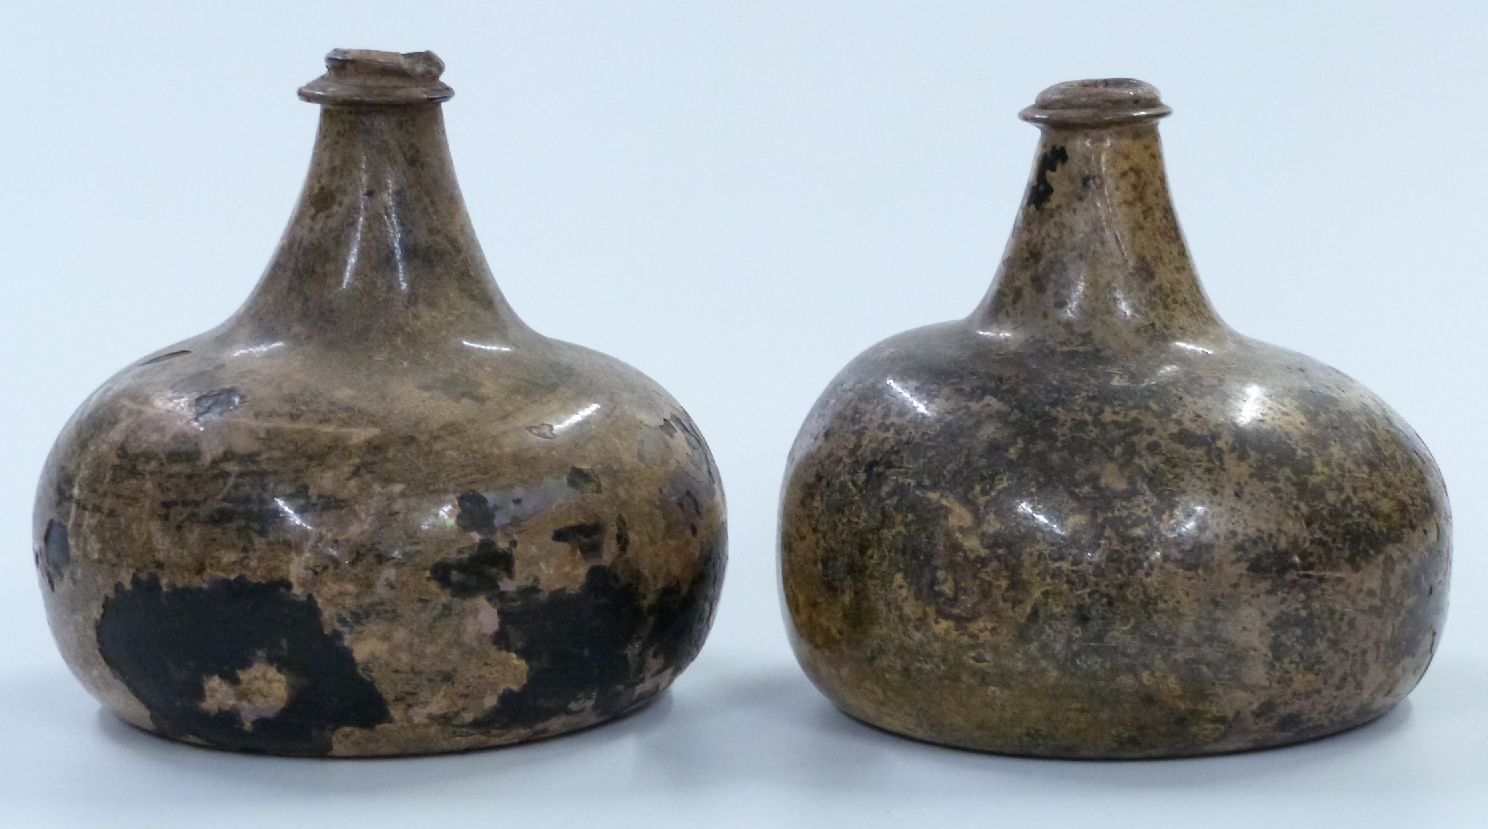 A near pair of early 18thC green glass onion wine bottles with iridescent finish, by repute dug up